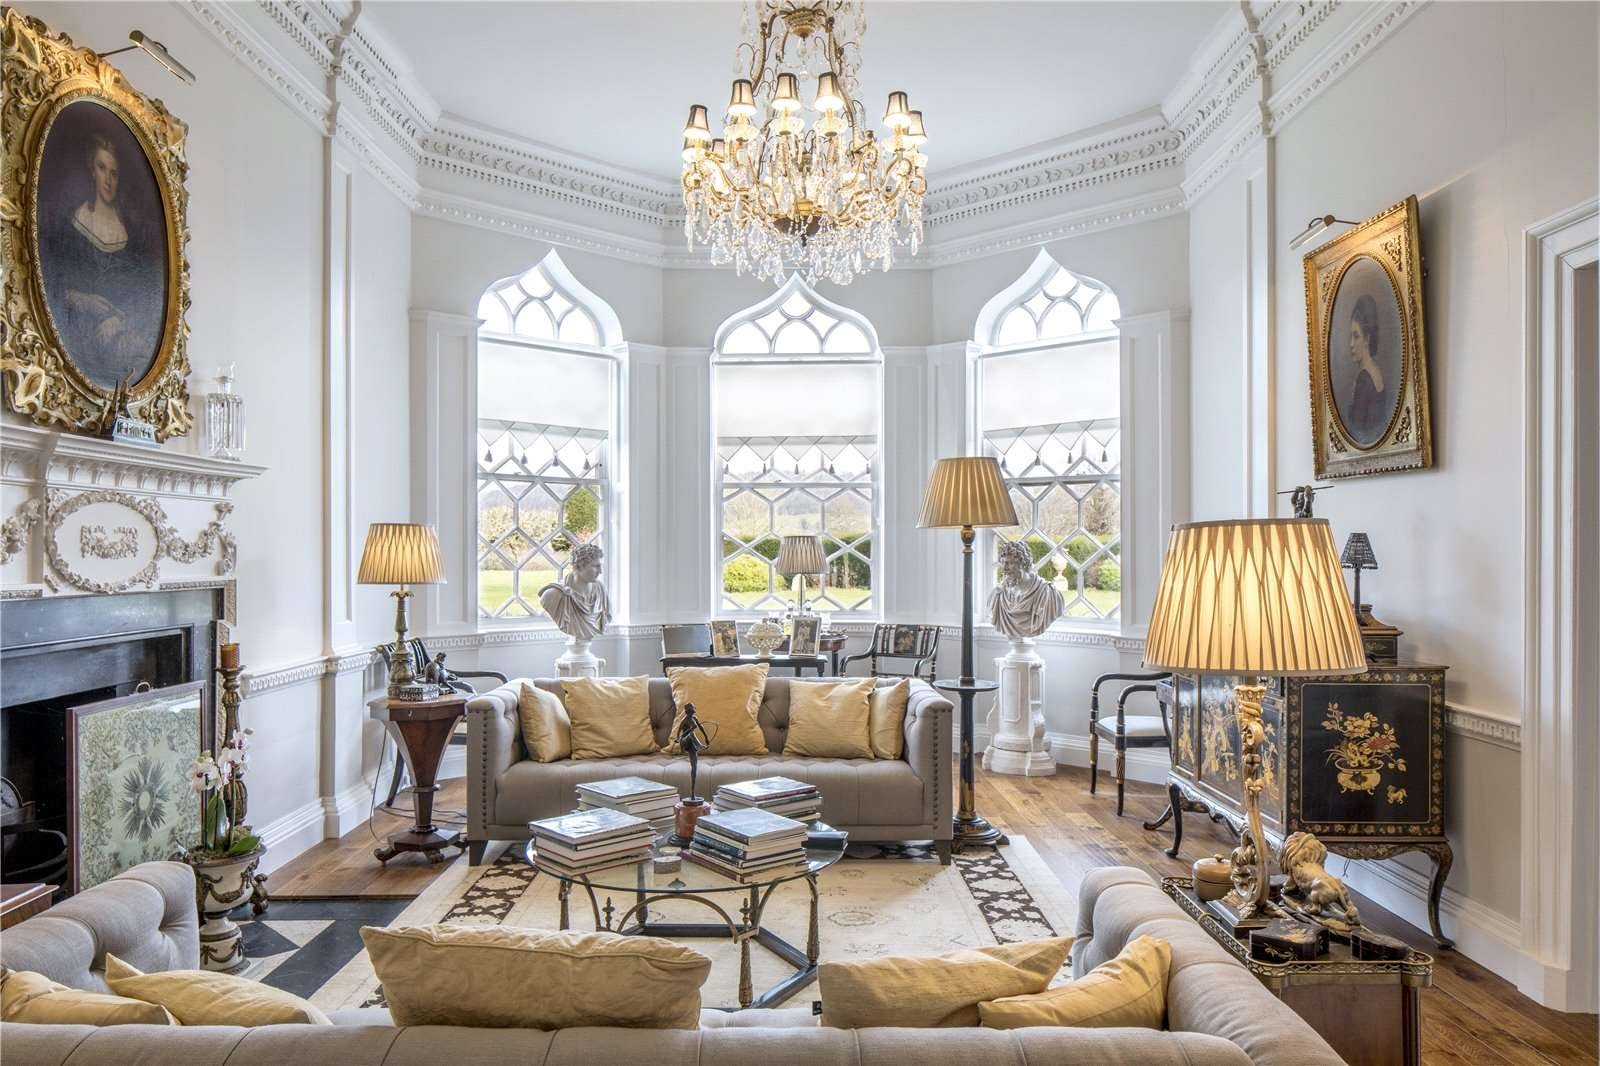 Francis York Rare Georgian Gothic-Style Country House in the Cotswolds is Under Offer  5.jpg